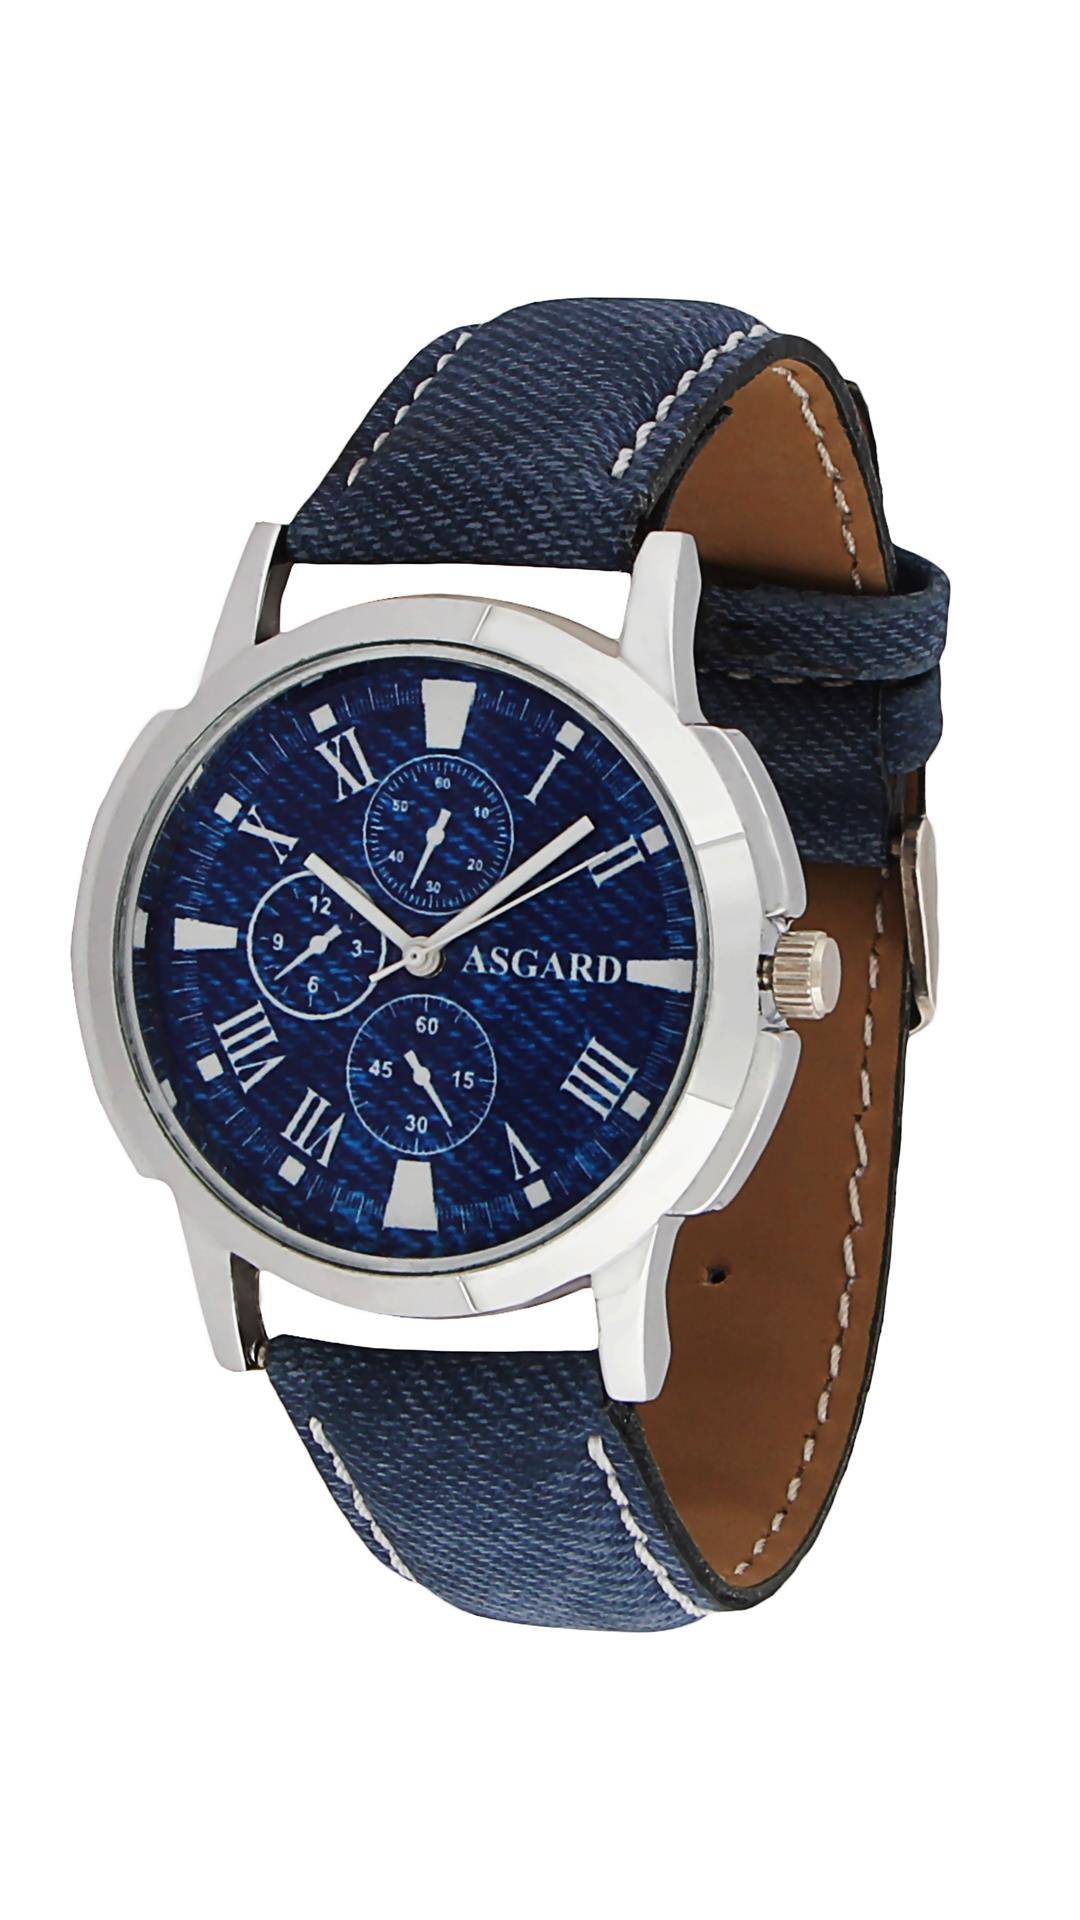 Buy Asgard Analog Wrist Watch For Men Online at Low Prices in India ...